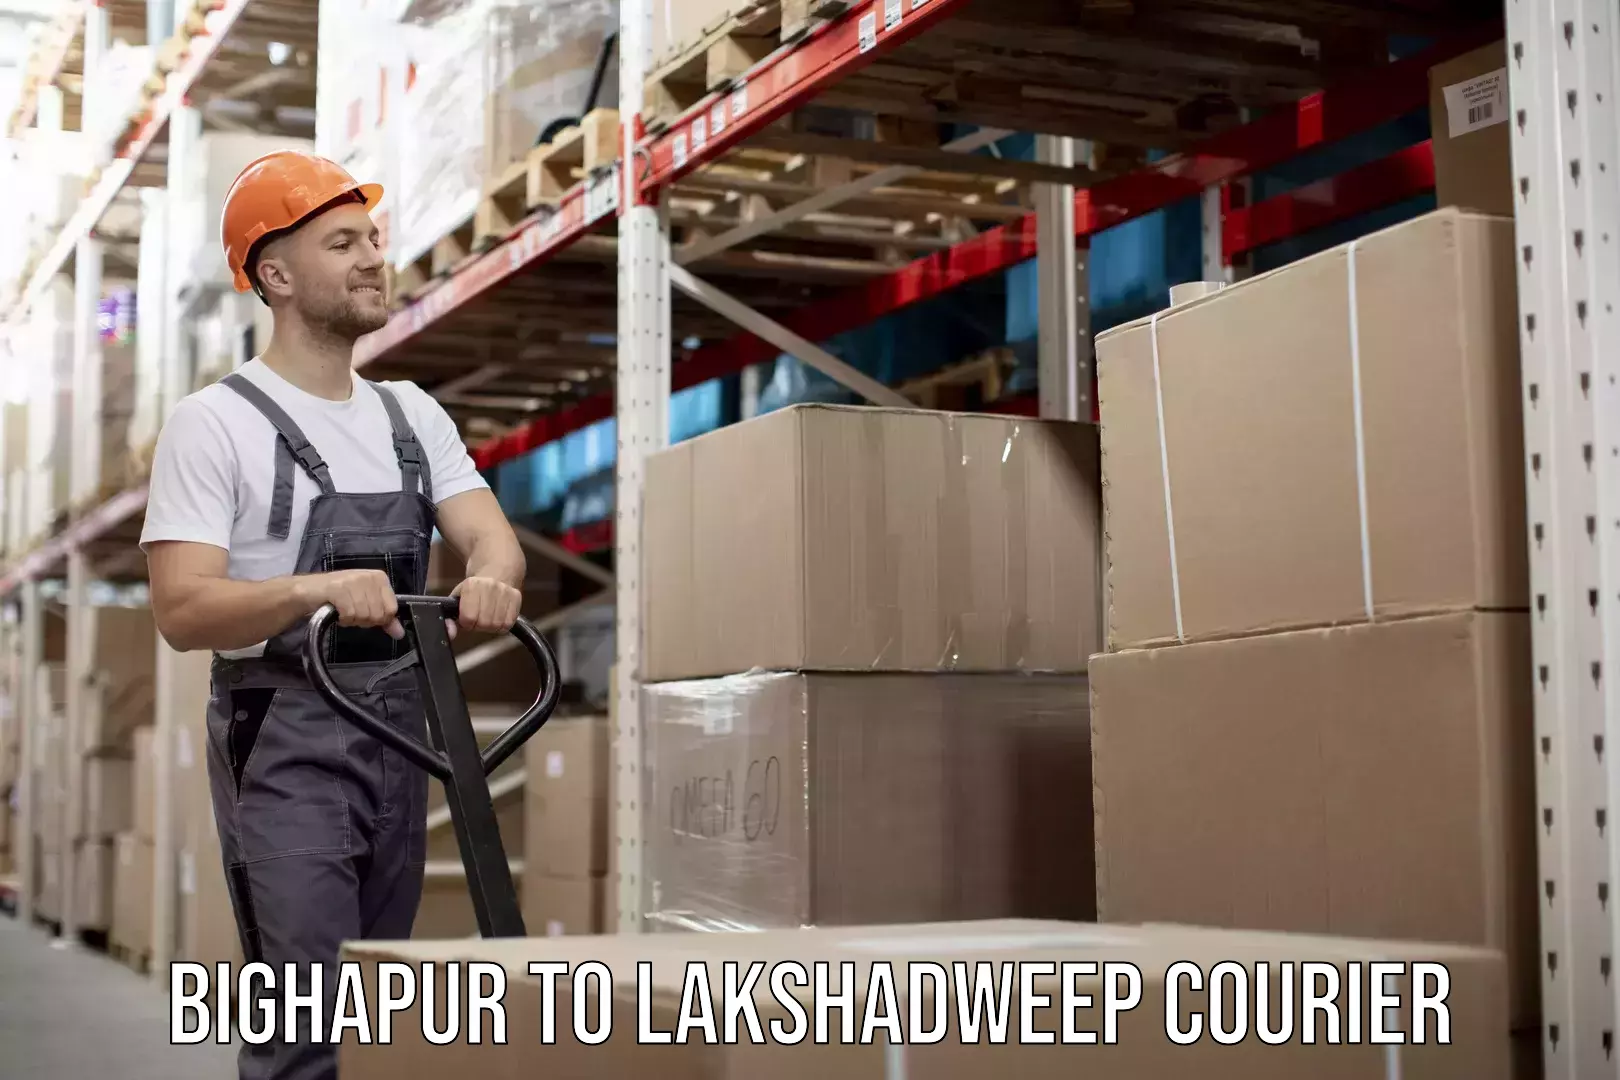 Full-service courier options Bighapur to Lakshadweep